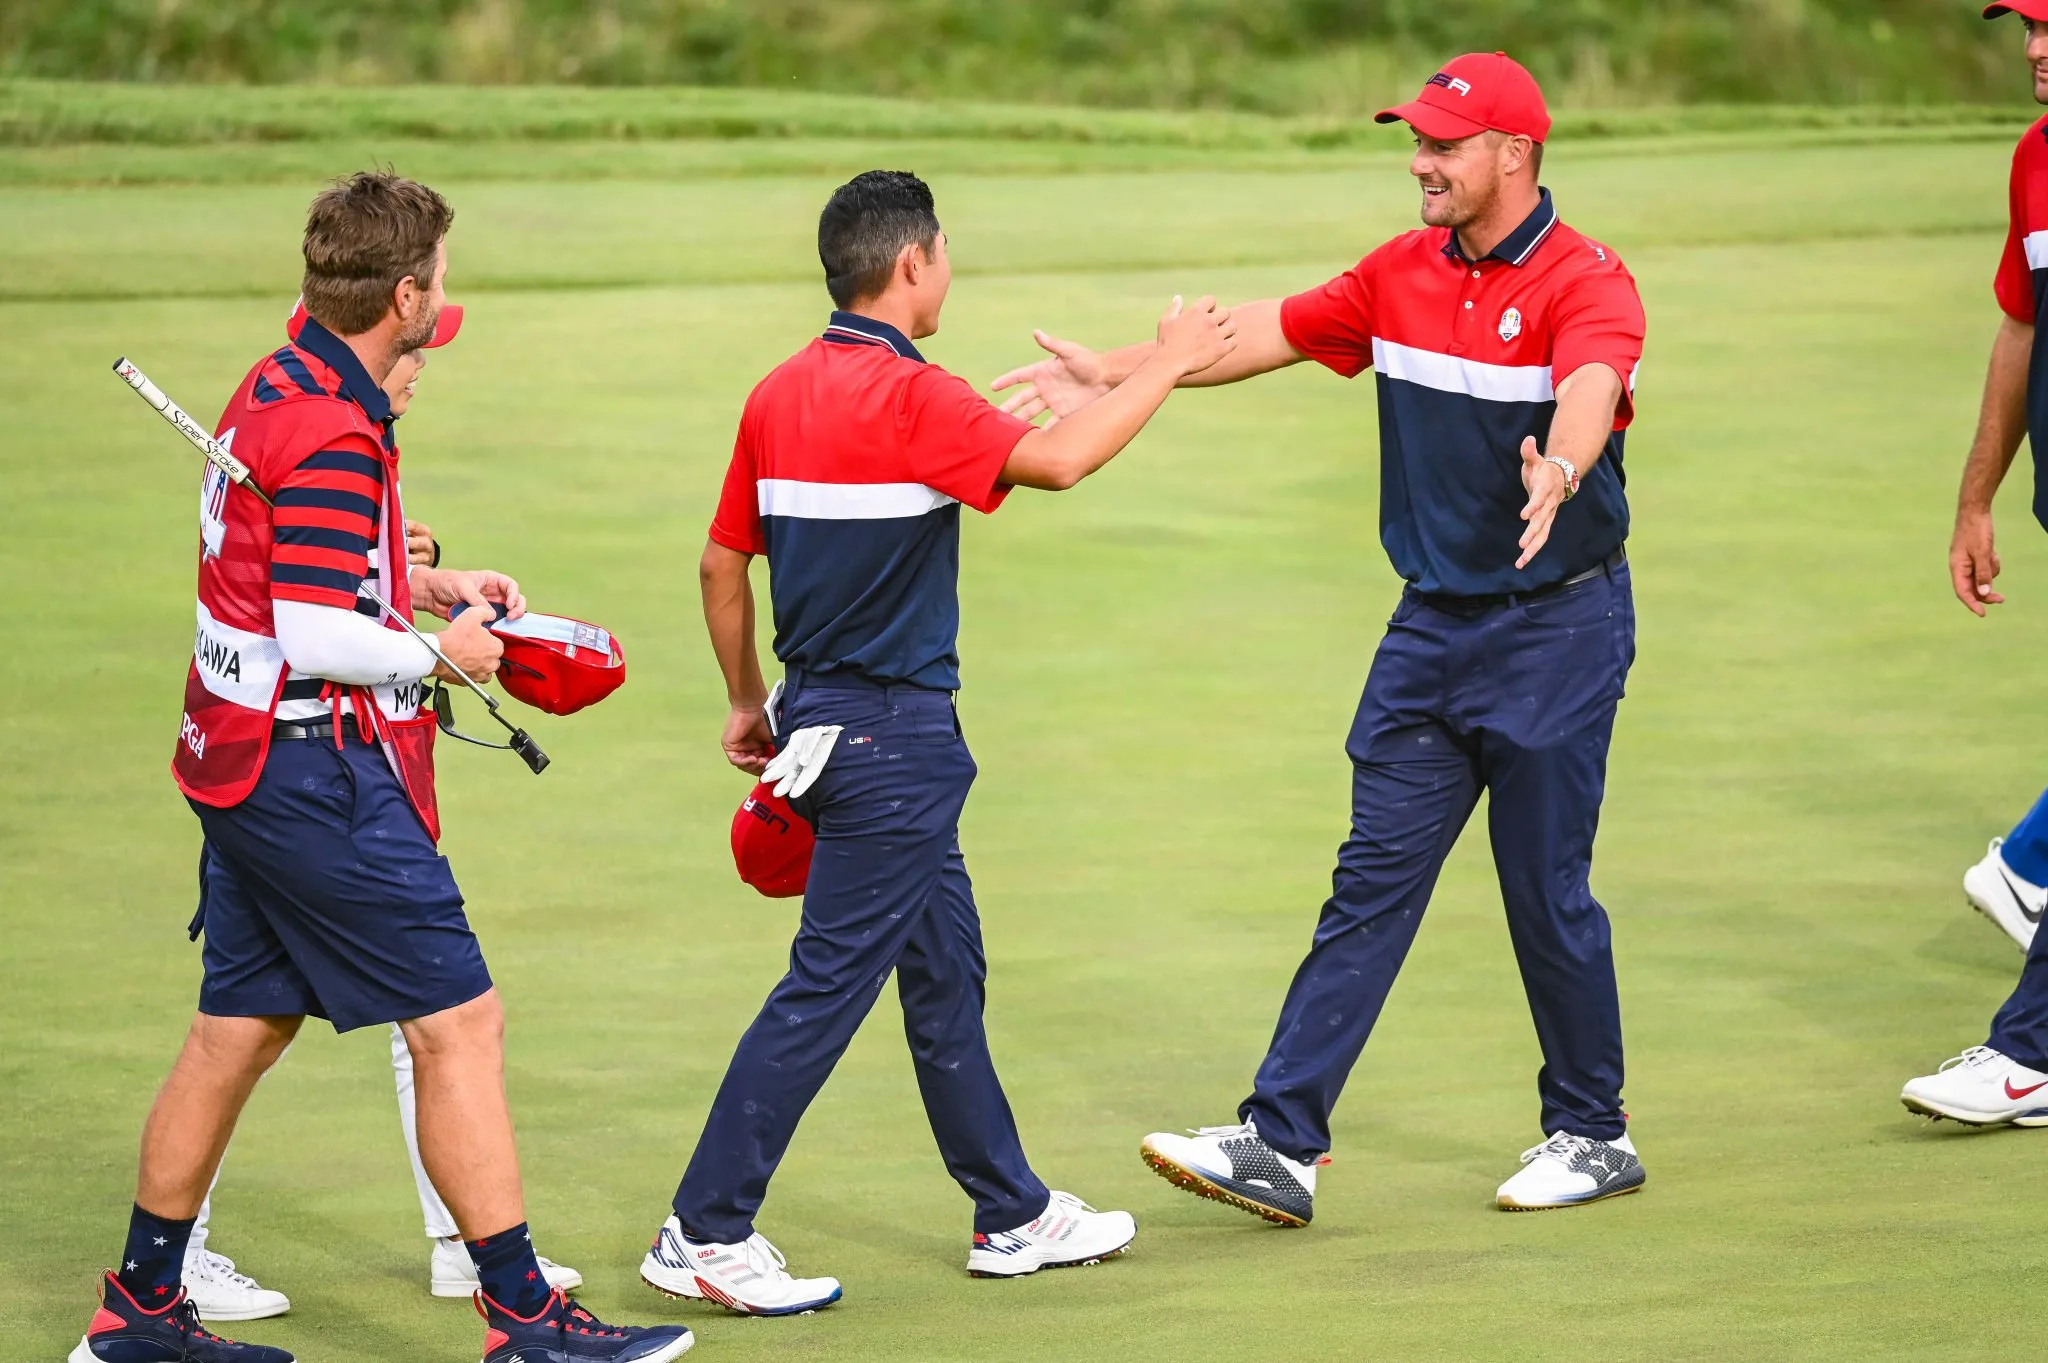 Bryson DeChambeau or Collin Morikawa: Is this a Ryder Cup dilemma Zach Johnson could face?